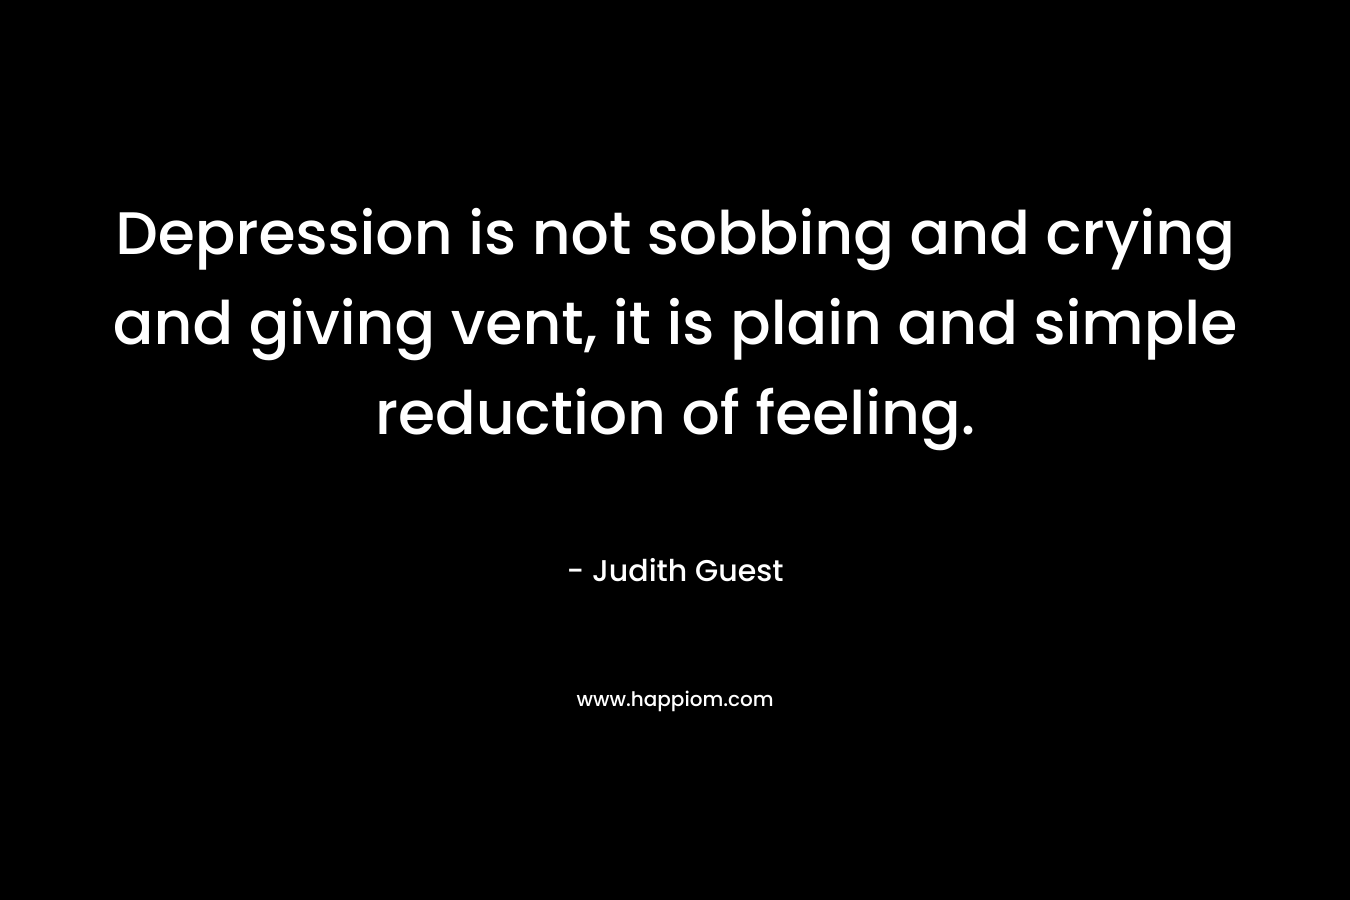 Depression is not sobbing and crying and giving vent, it is plain and simple reduction of feeling. – Judith Guest